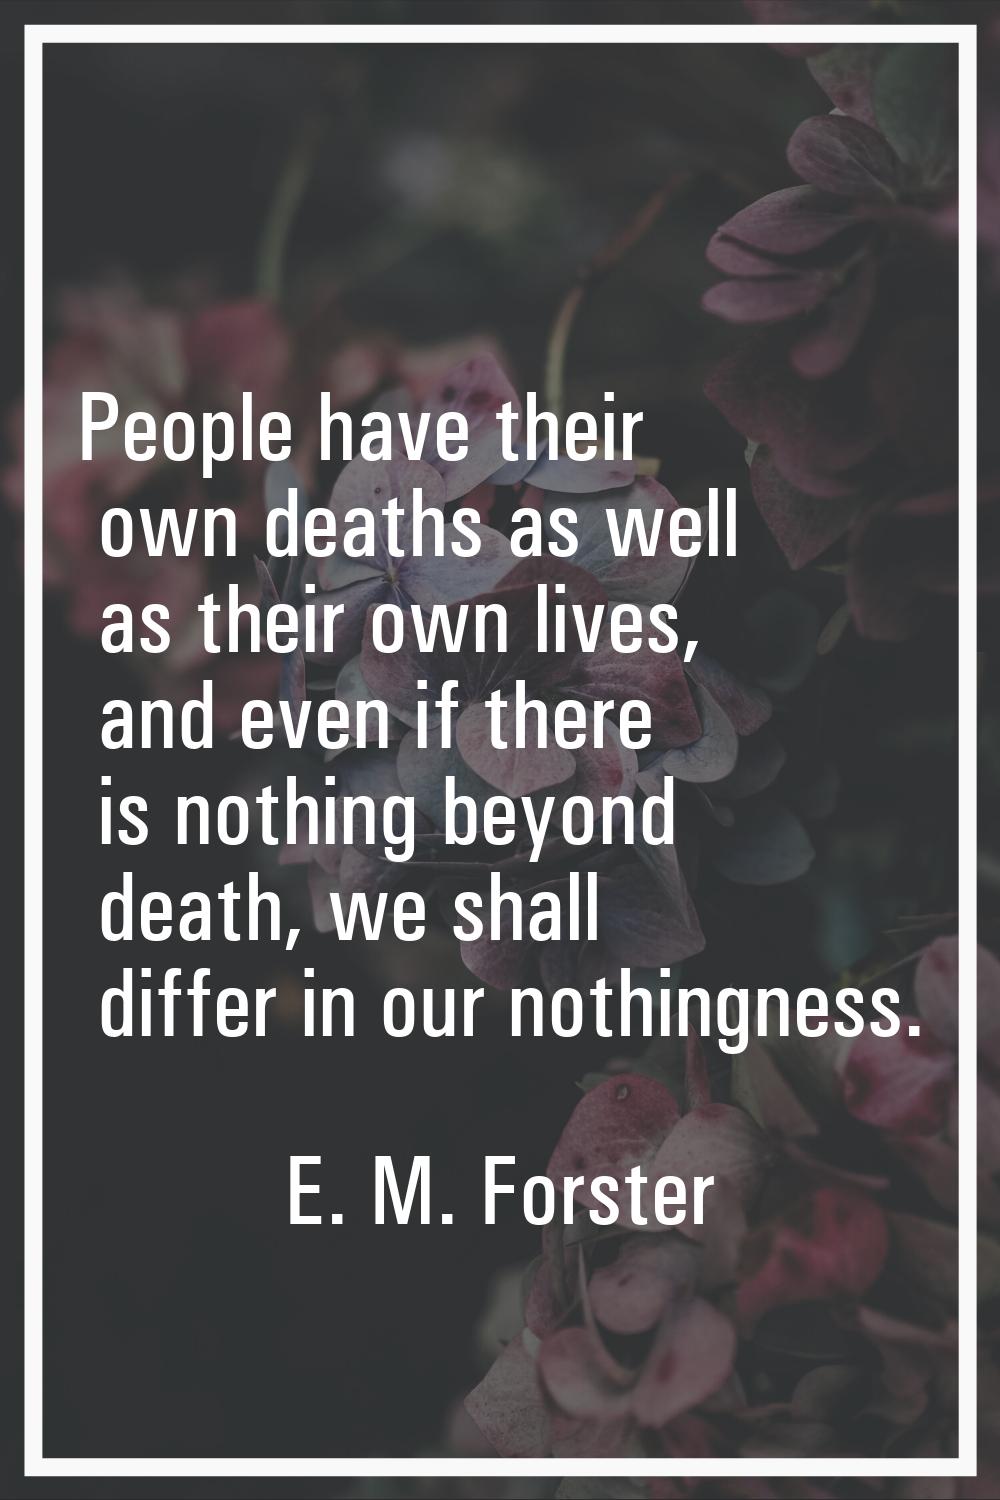 People have their own deaths as well as their own lives, and even if there is nothing beyond death,